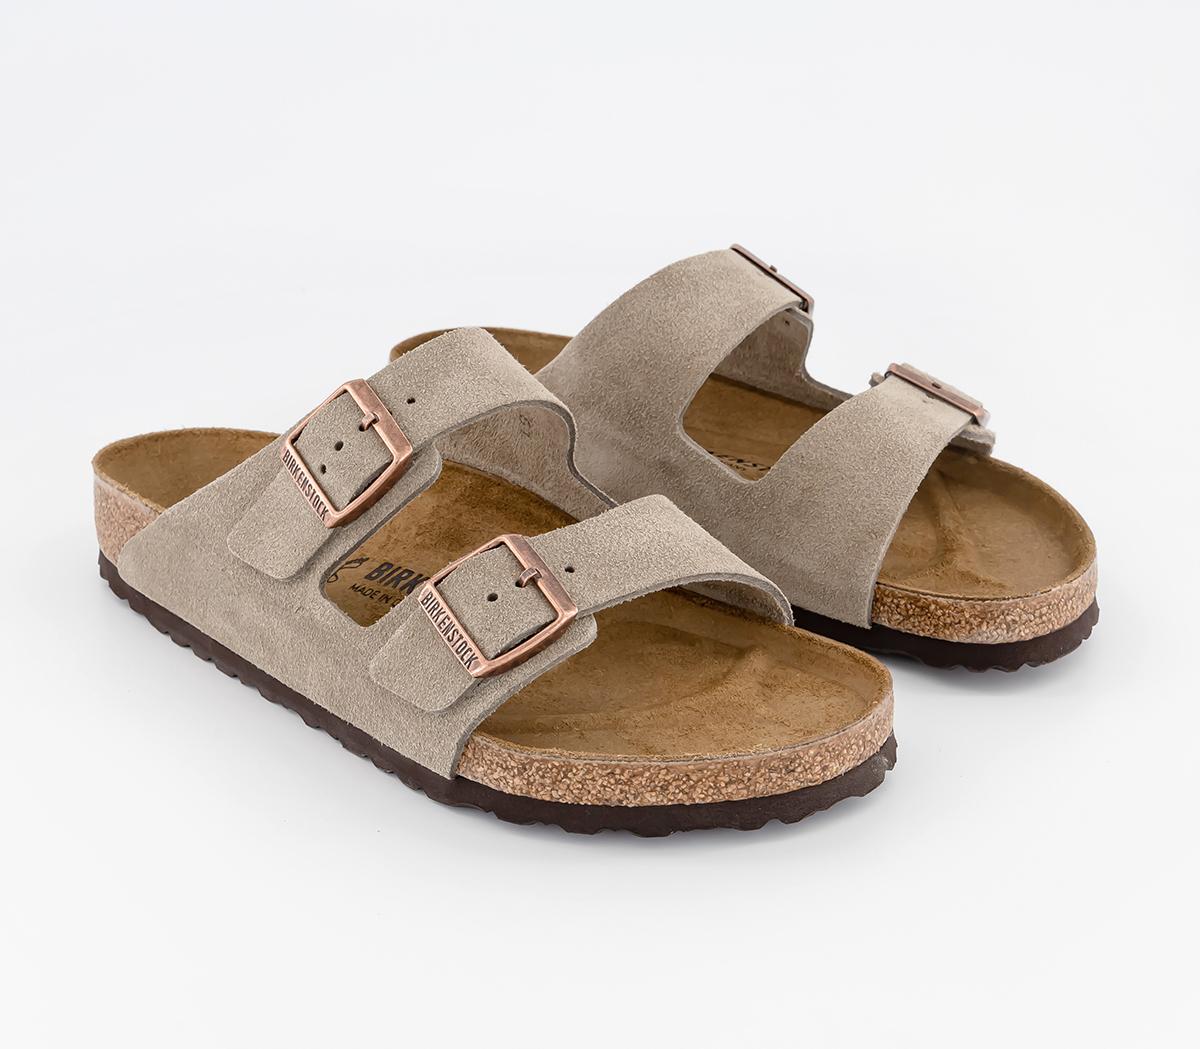 Birkenstock Mens Arizona Two Strap Sandals Taupe Suede Natural, 7.5